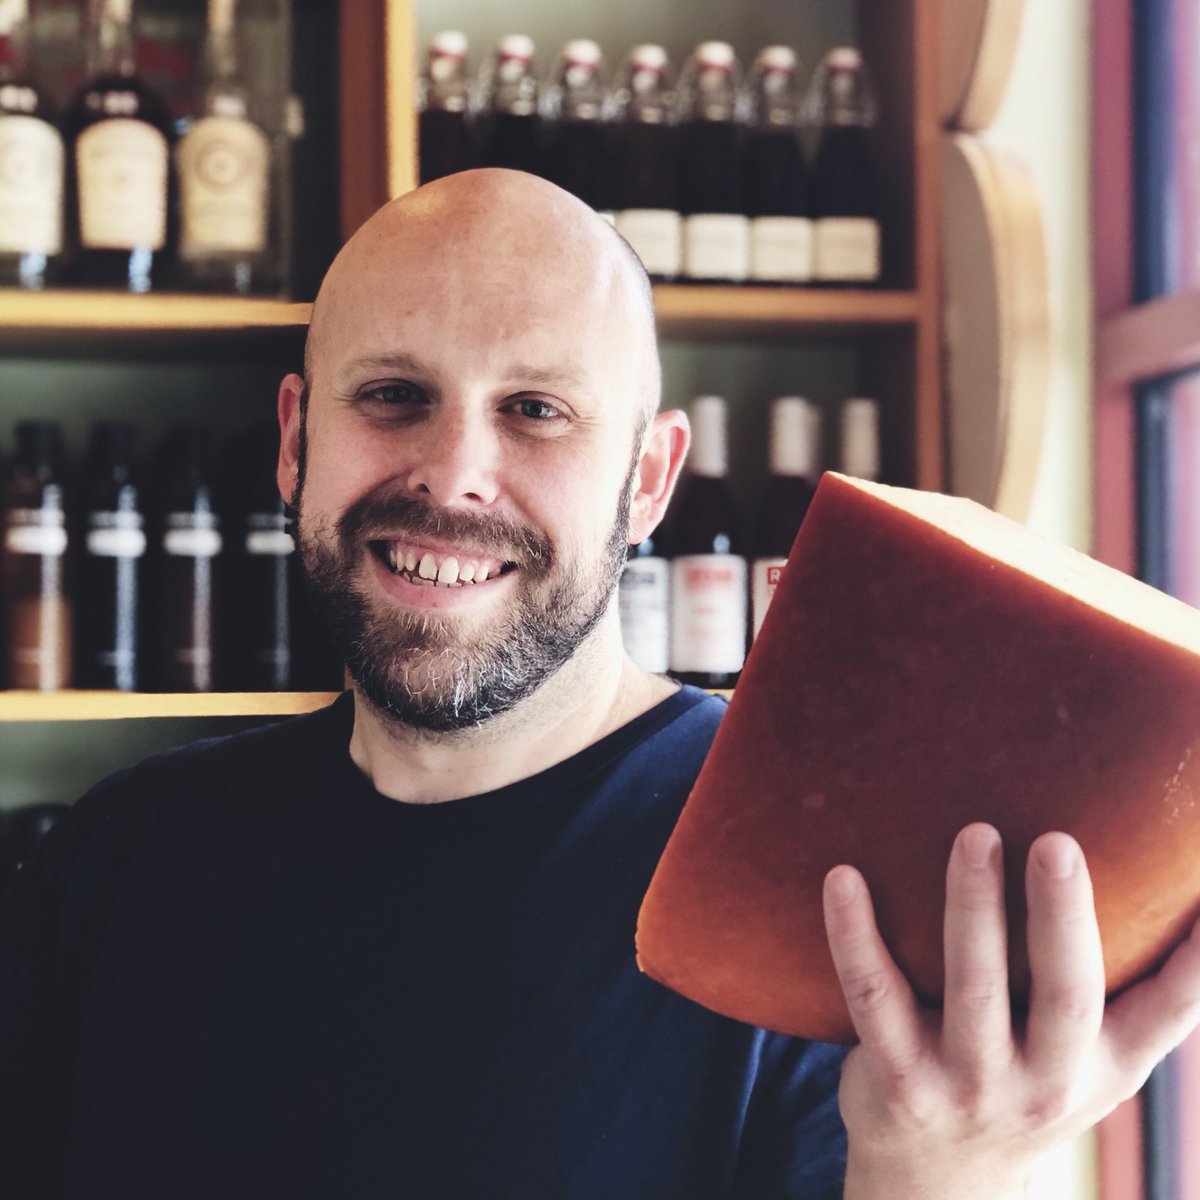 Did you know our Manager, Lincoln Broadbooks (@LincolnBbooks) is now one of the first American Cheese Society Certified Cheese Sensory Evaluators! Lincoln is one of only 29 other CCSEs in the US & Canada. (Photo by @patmccroy)
#Cheese #CheeseExpert #CCSE #KansasCity #KCMO #PVKS